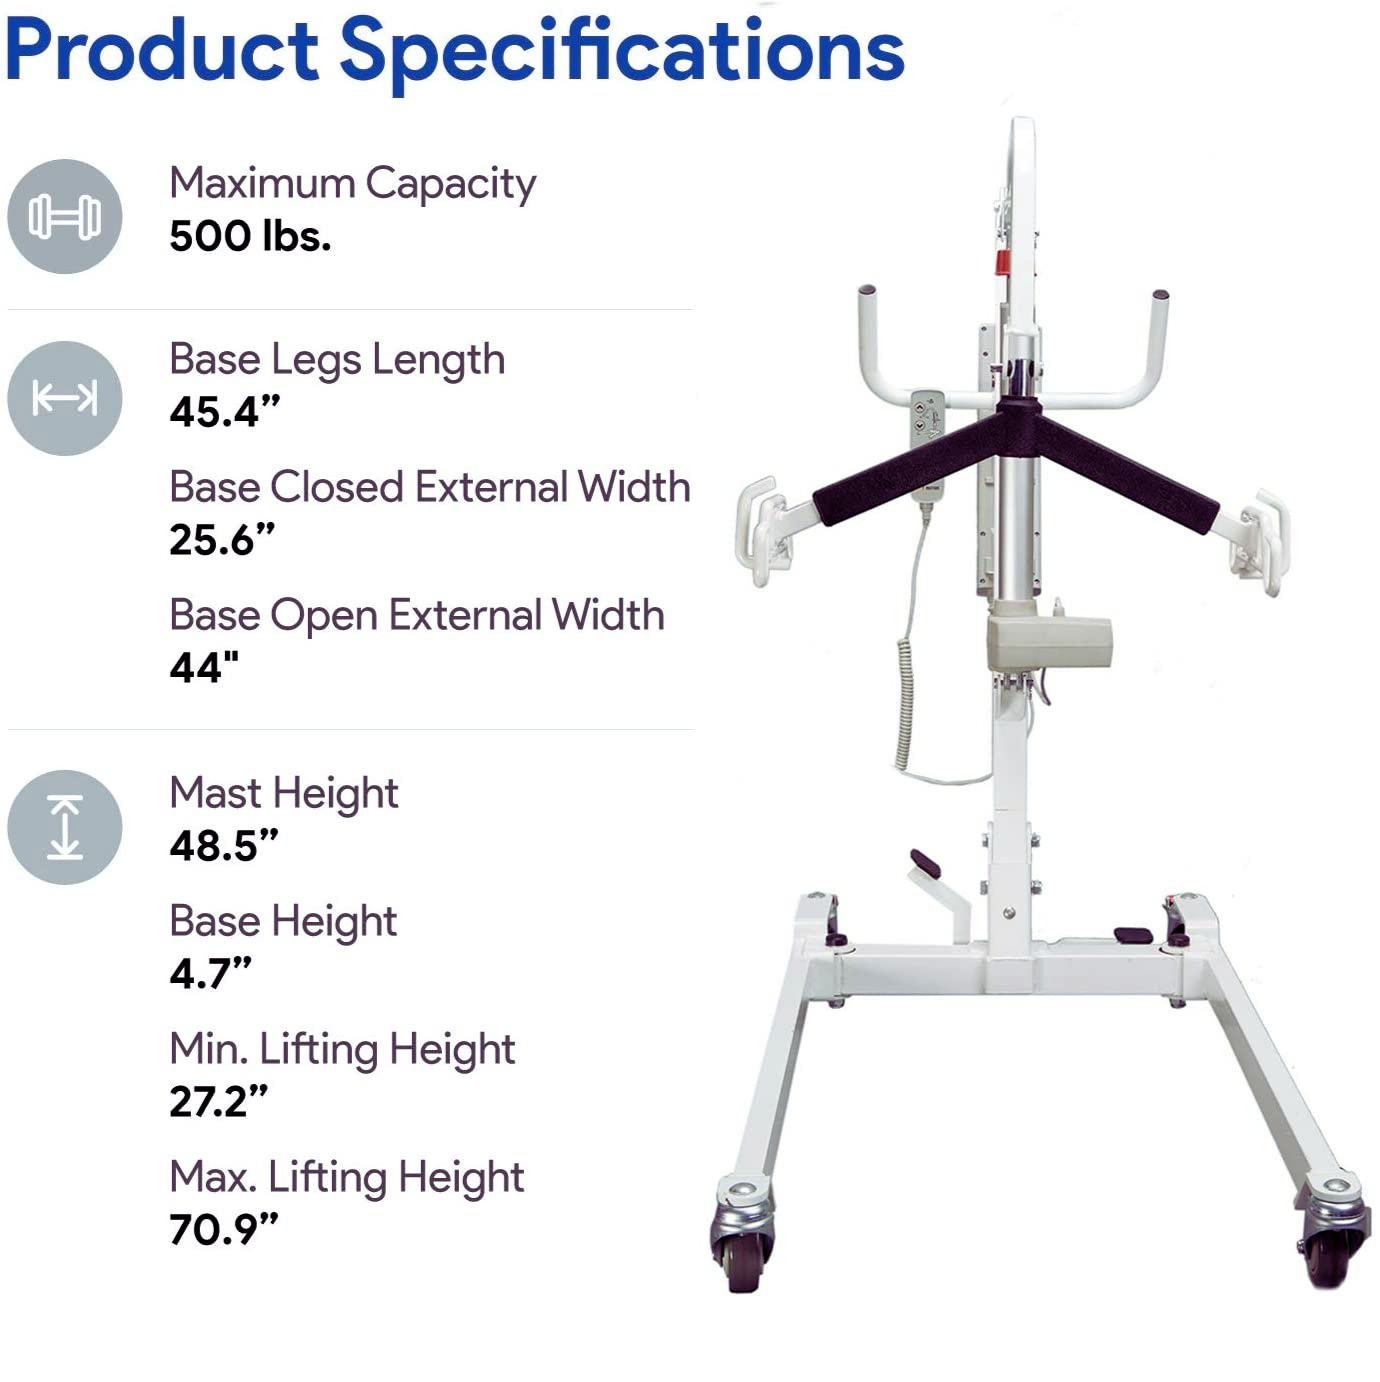 lift specifications image 